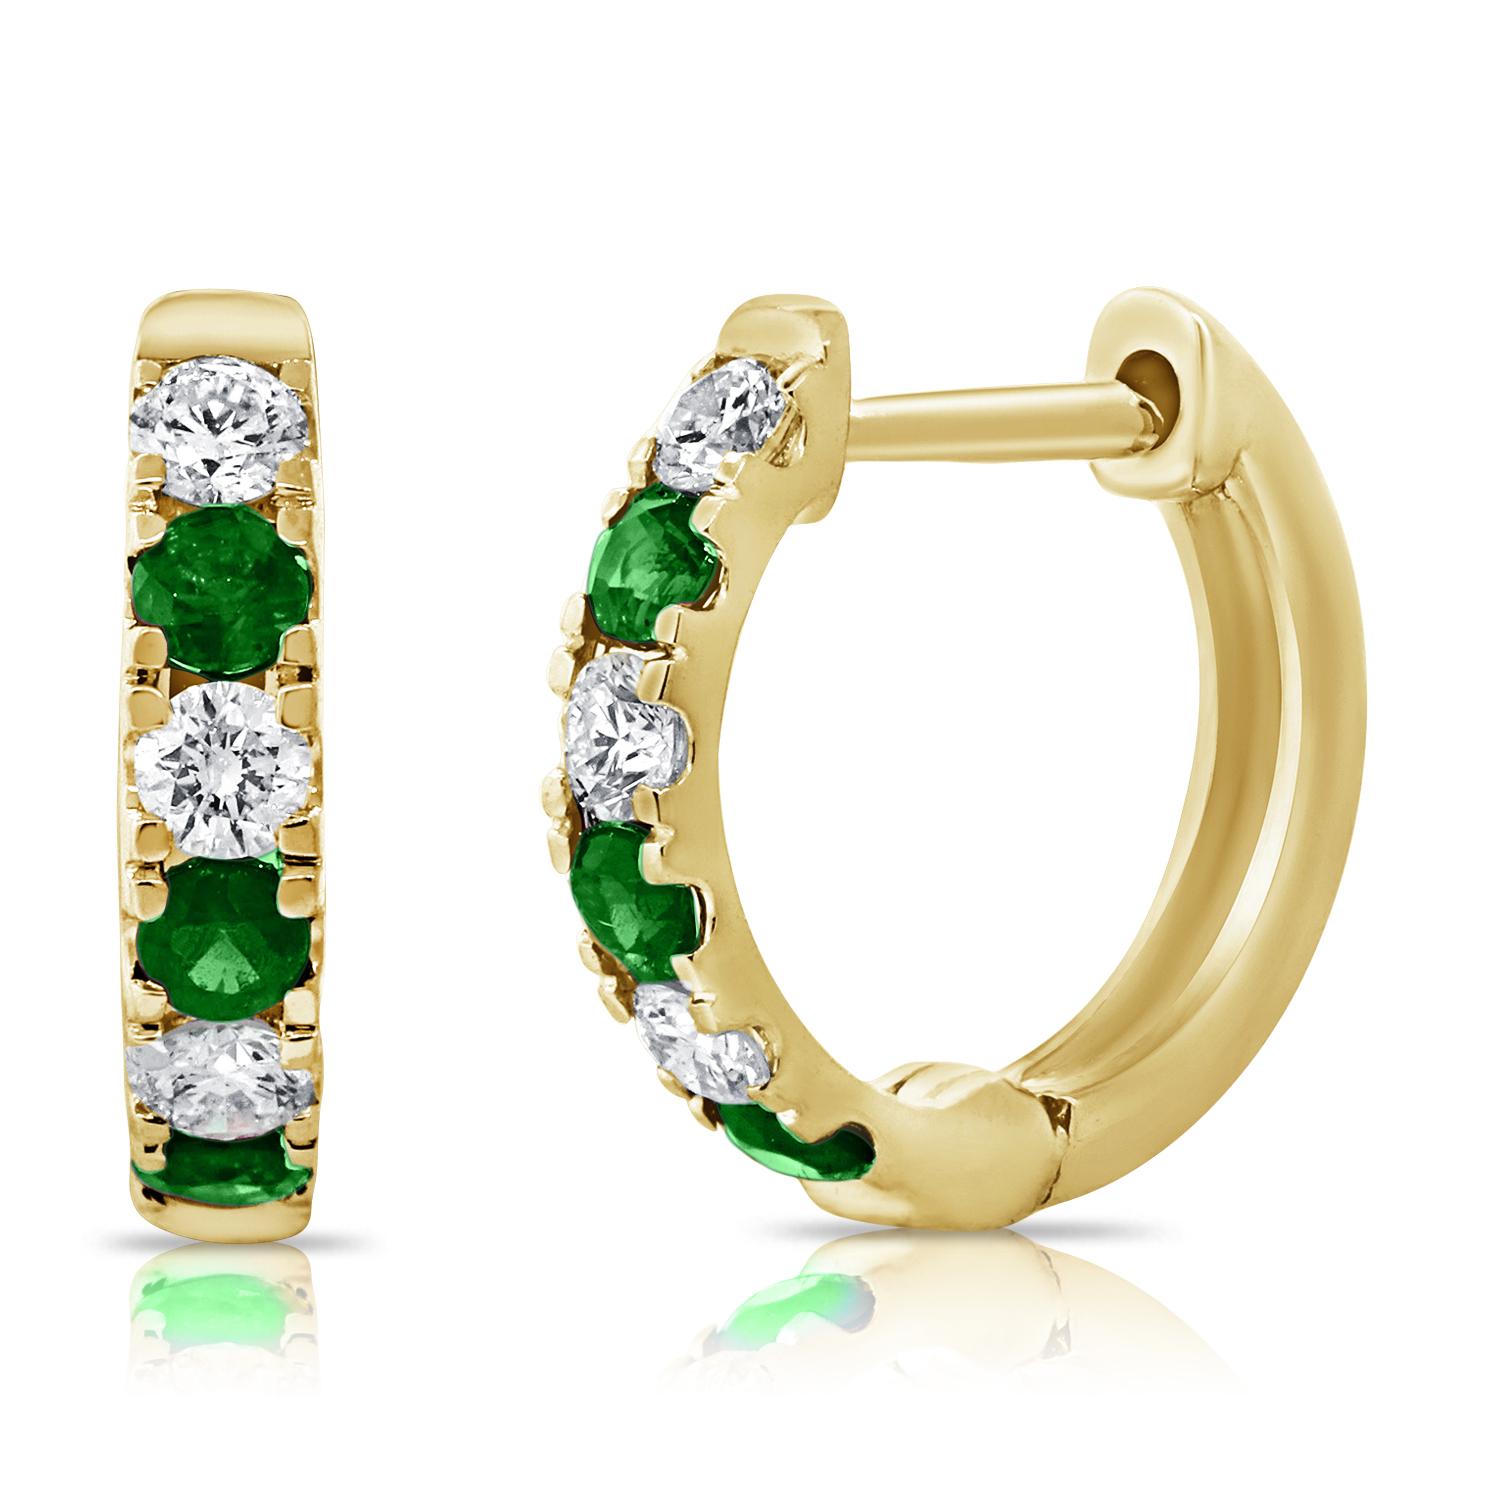 14K EMERALD & DIAMOND ALTERNATING HUGGIE EARRING
              - Diamond Weight: 0.24 ct.
              - Emerald Weight: 0.28 ct.
              - Gold Weight: 1.80 grams ( approx.) 
              - Earring Length: 0.50 inches

This piece is perfect